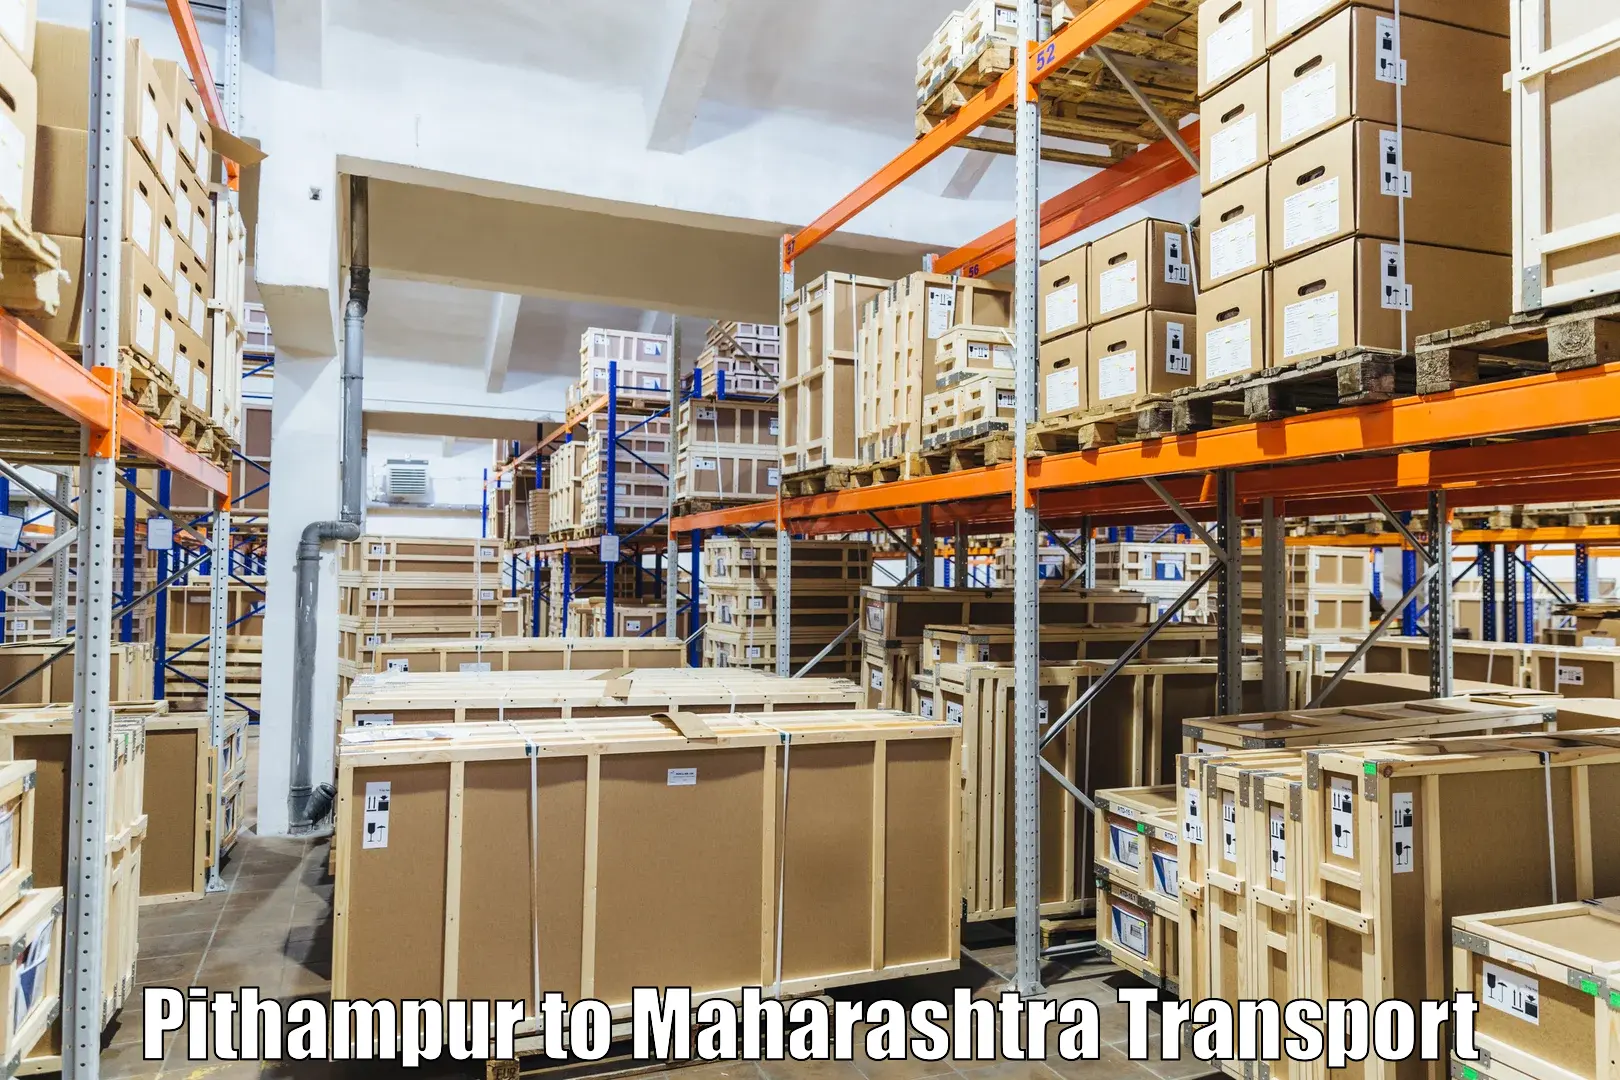 Land transport services Pithampur to Chandrapur